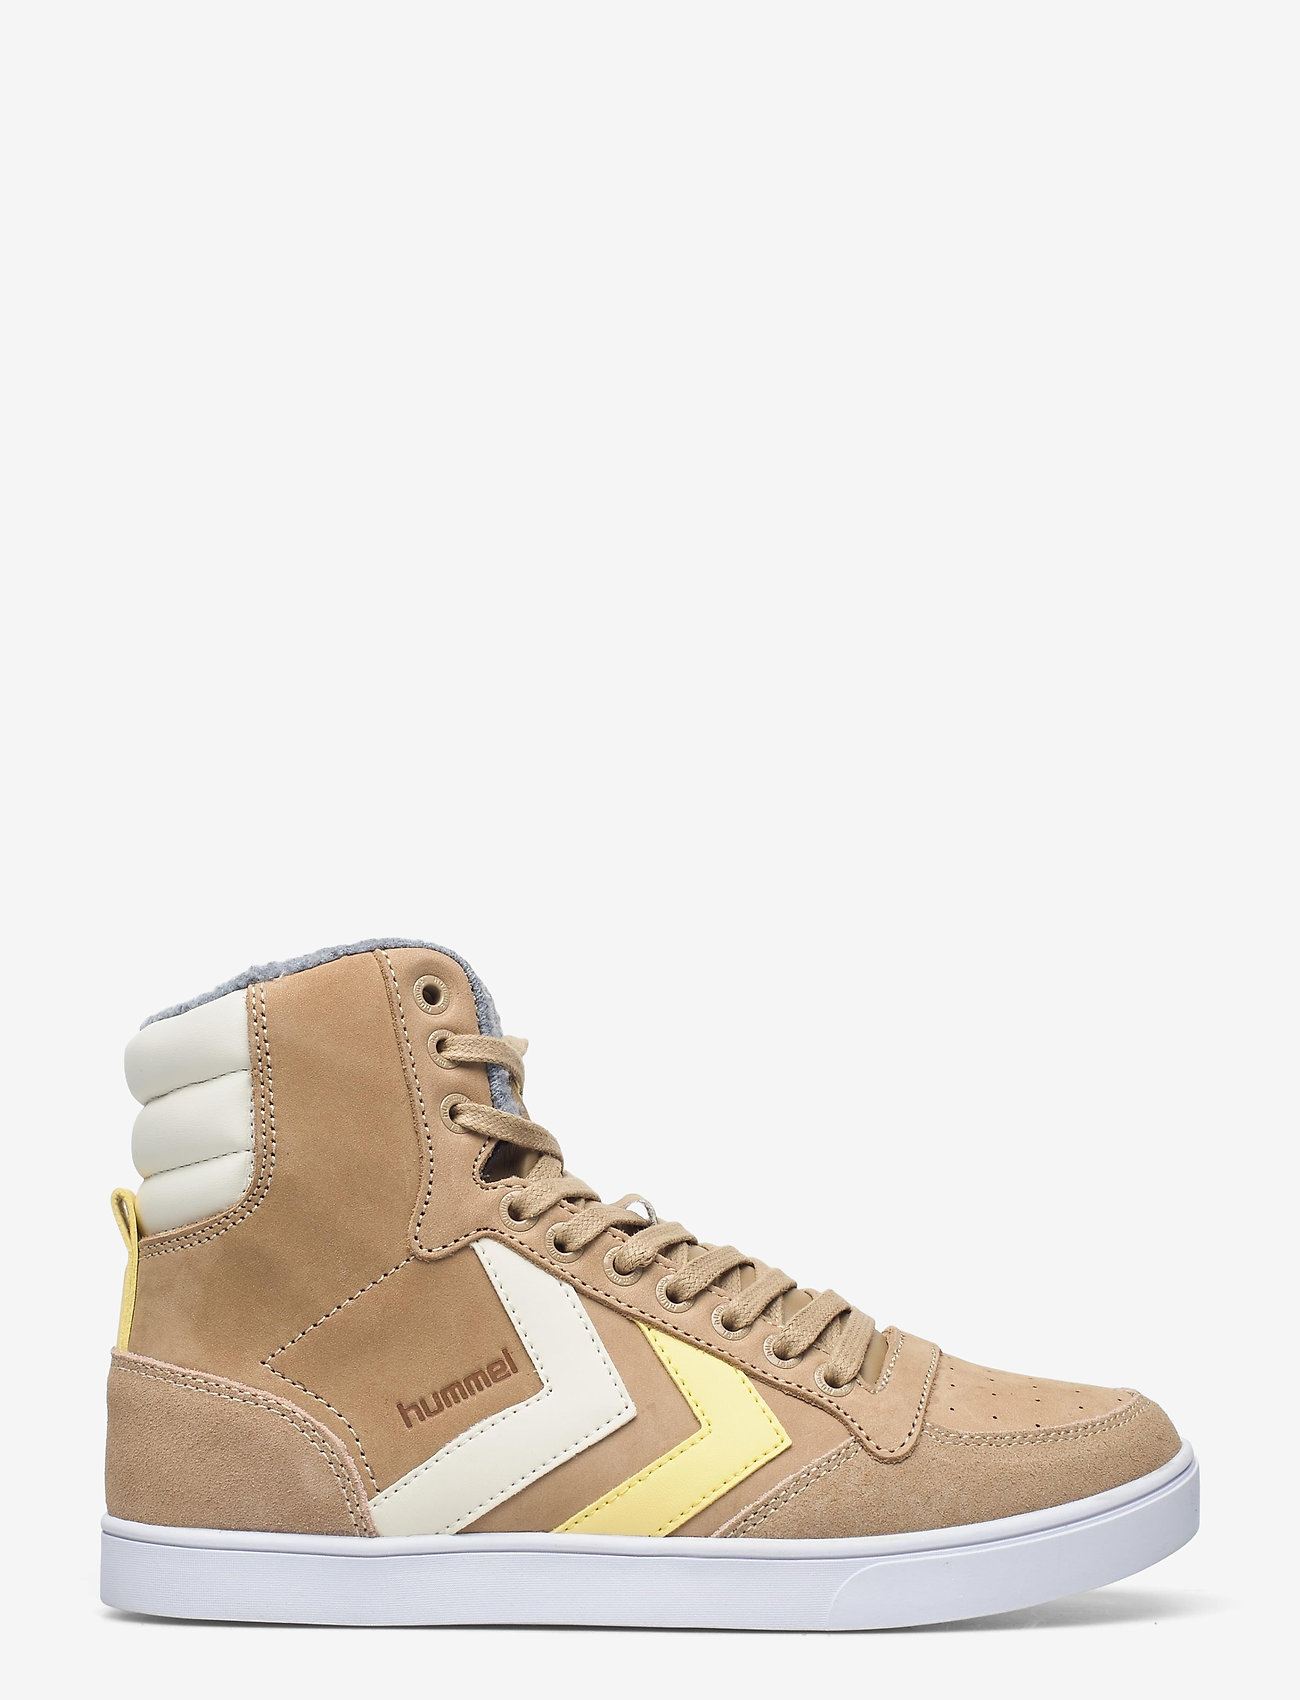 Hummel Slimmer Stadil Duo Oiled High - top sneakers | Boozt.com